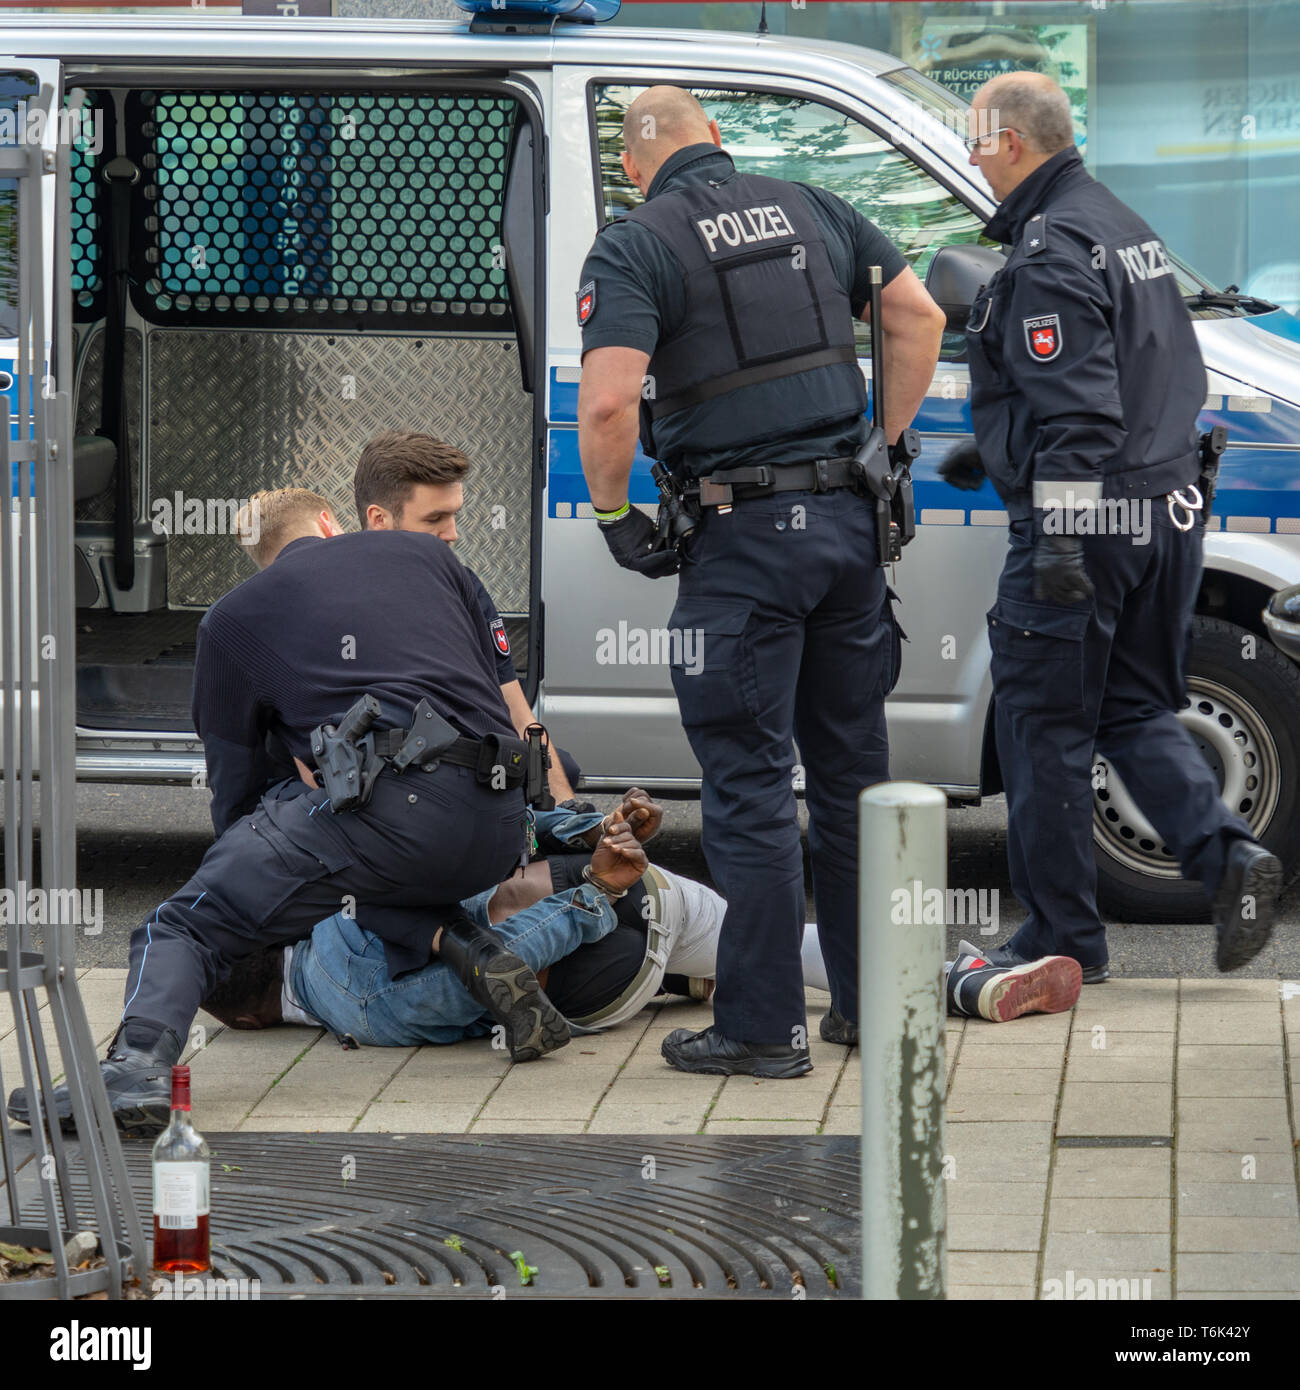 Wolfsburg, Germany, May 1, 2019: A dark-skinned man is handcuffed by German police officers in black uniforms and held at the bottom of the sidewalk,  Stock Photo